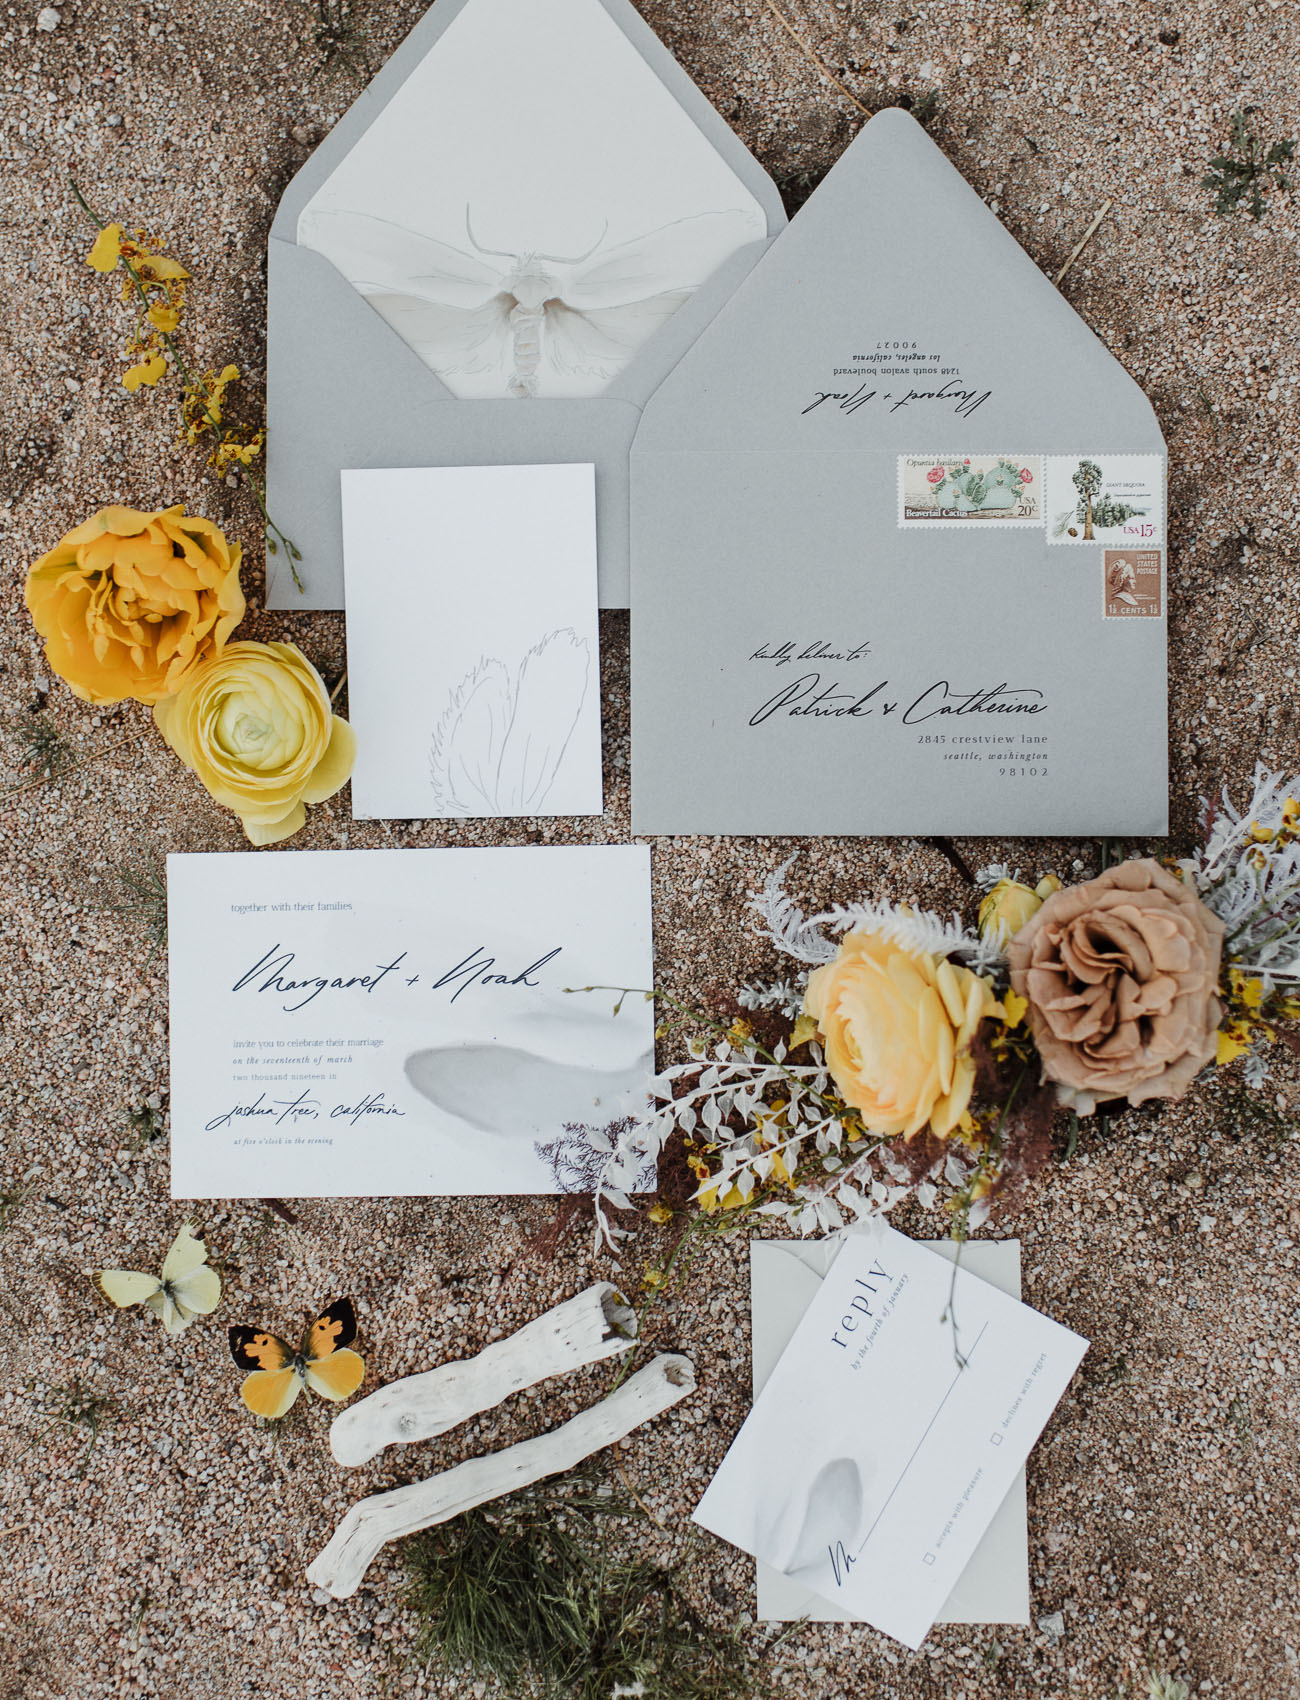 The wedding invitation suite was done in grey and white, with black calligraphy and insect prints